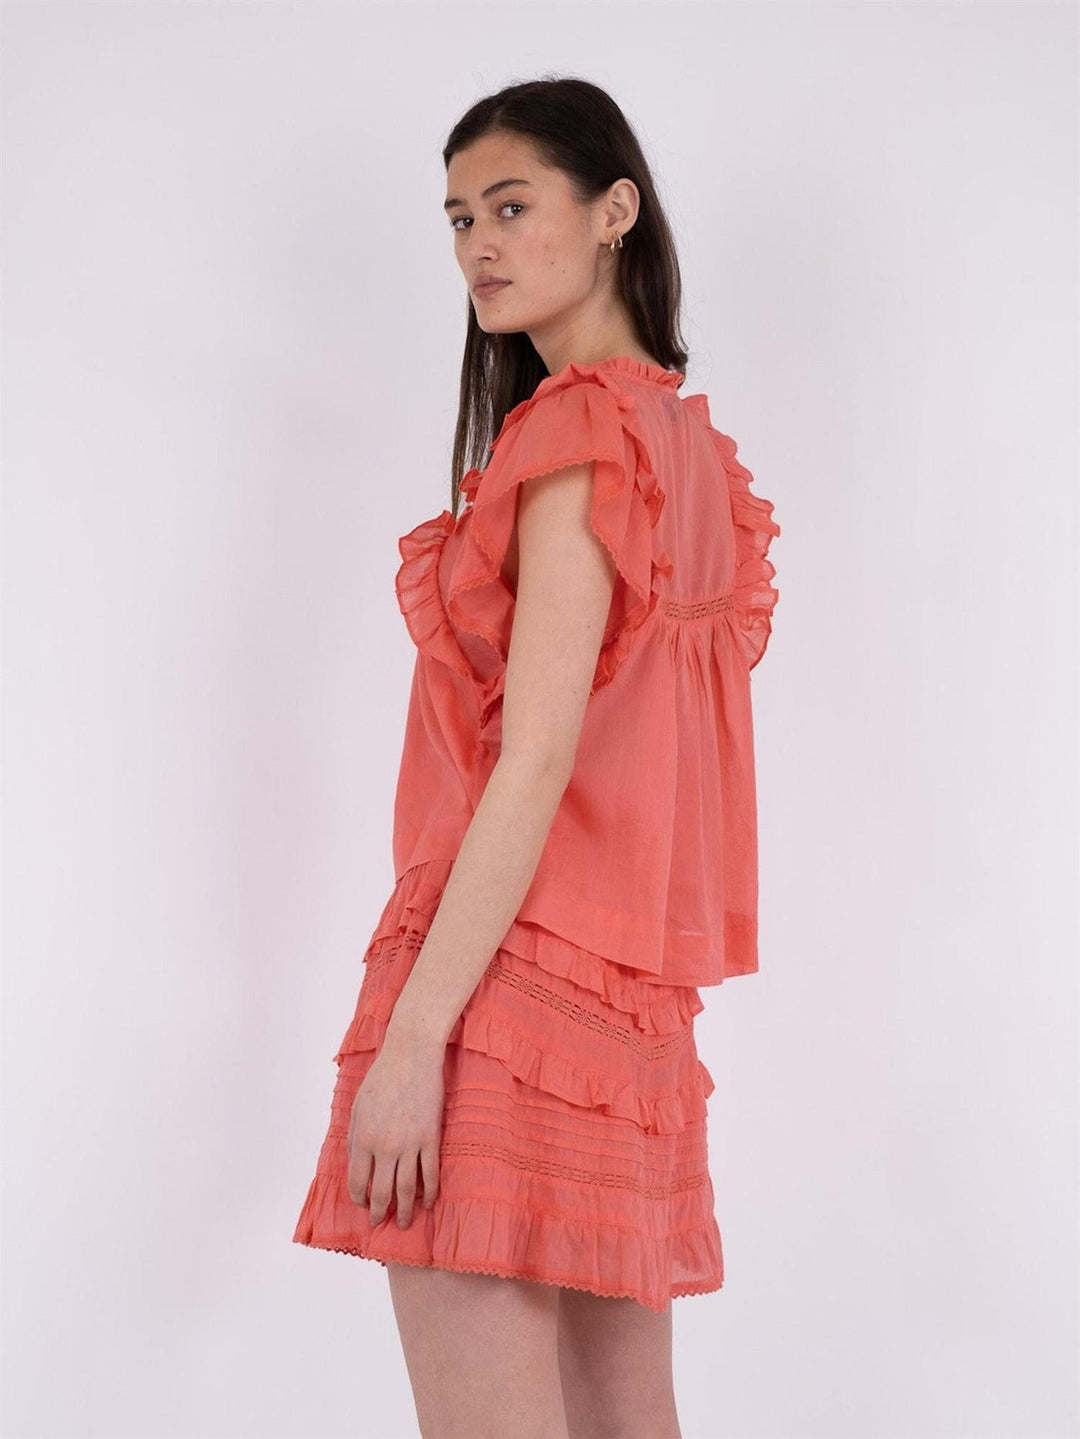 JAYLA S VOILE TOP  Coral